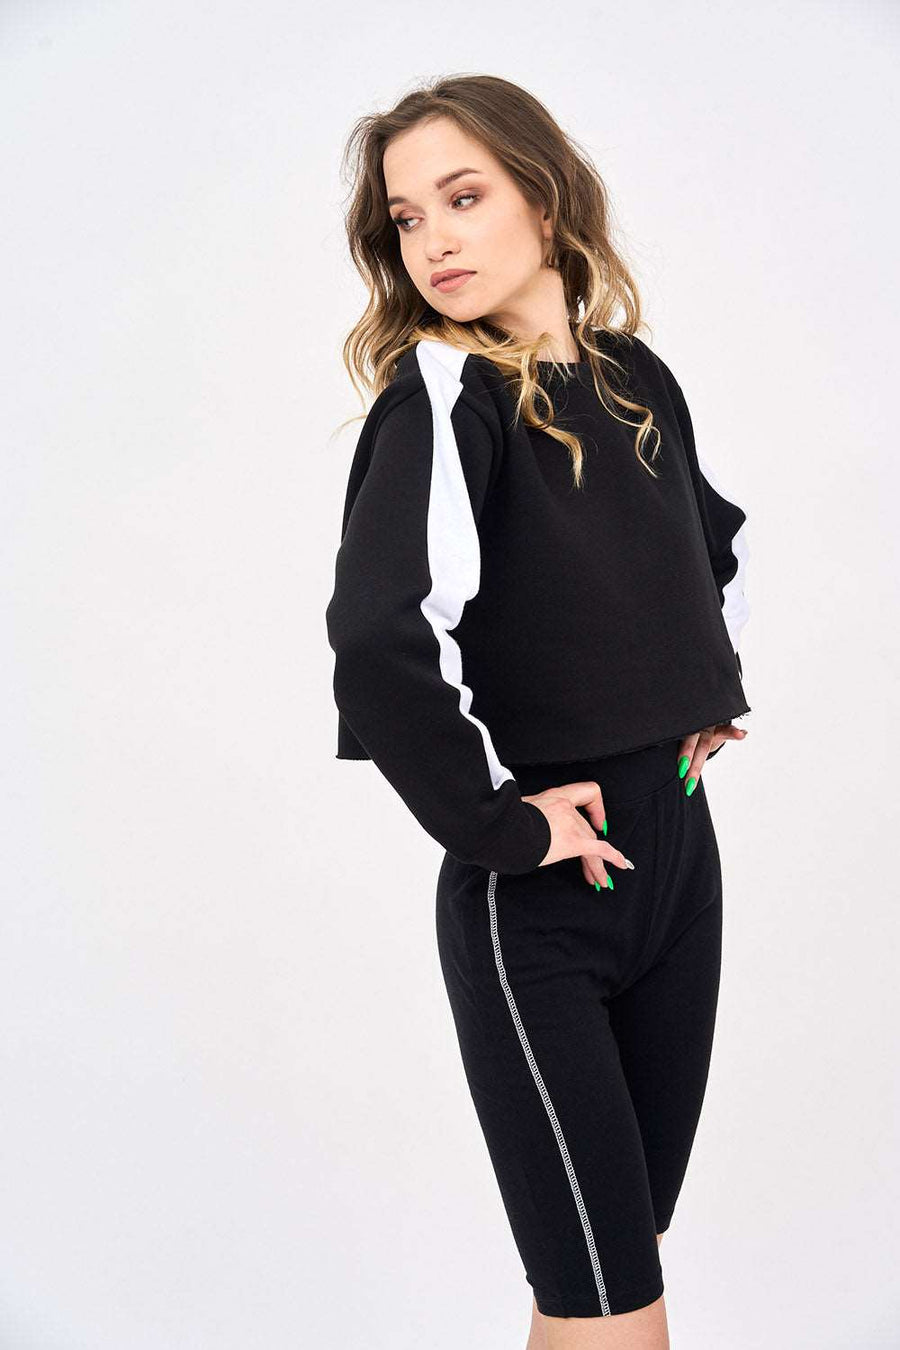 Women's Contrast Paneled Crop Sweater With Cycling Shorts